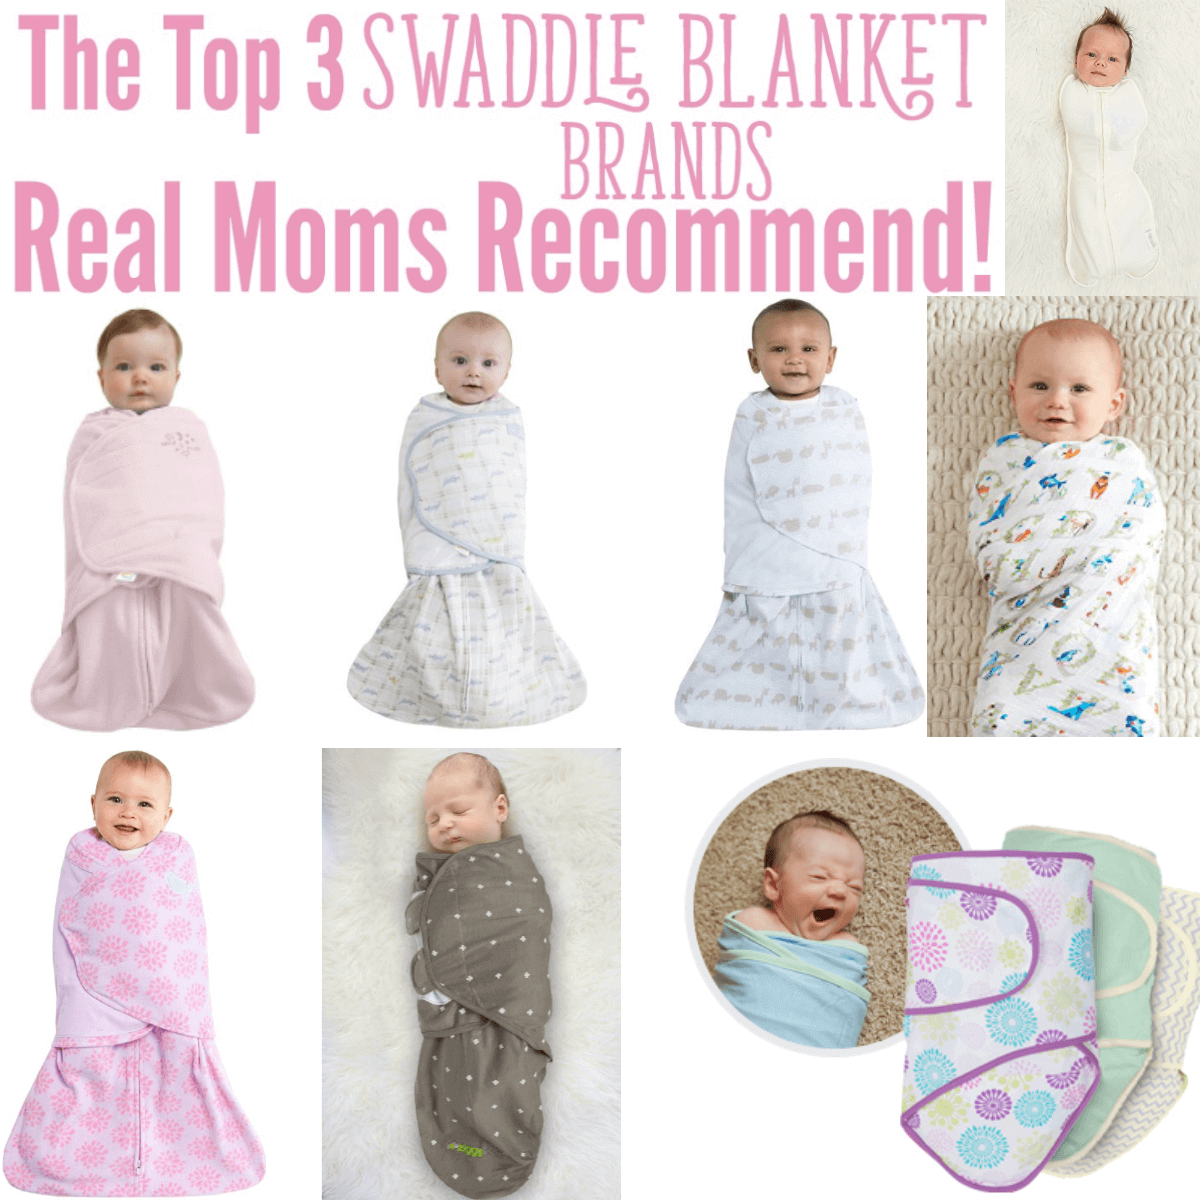 The Top Swaddle Blanket Brands Recommended by Real Moms